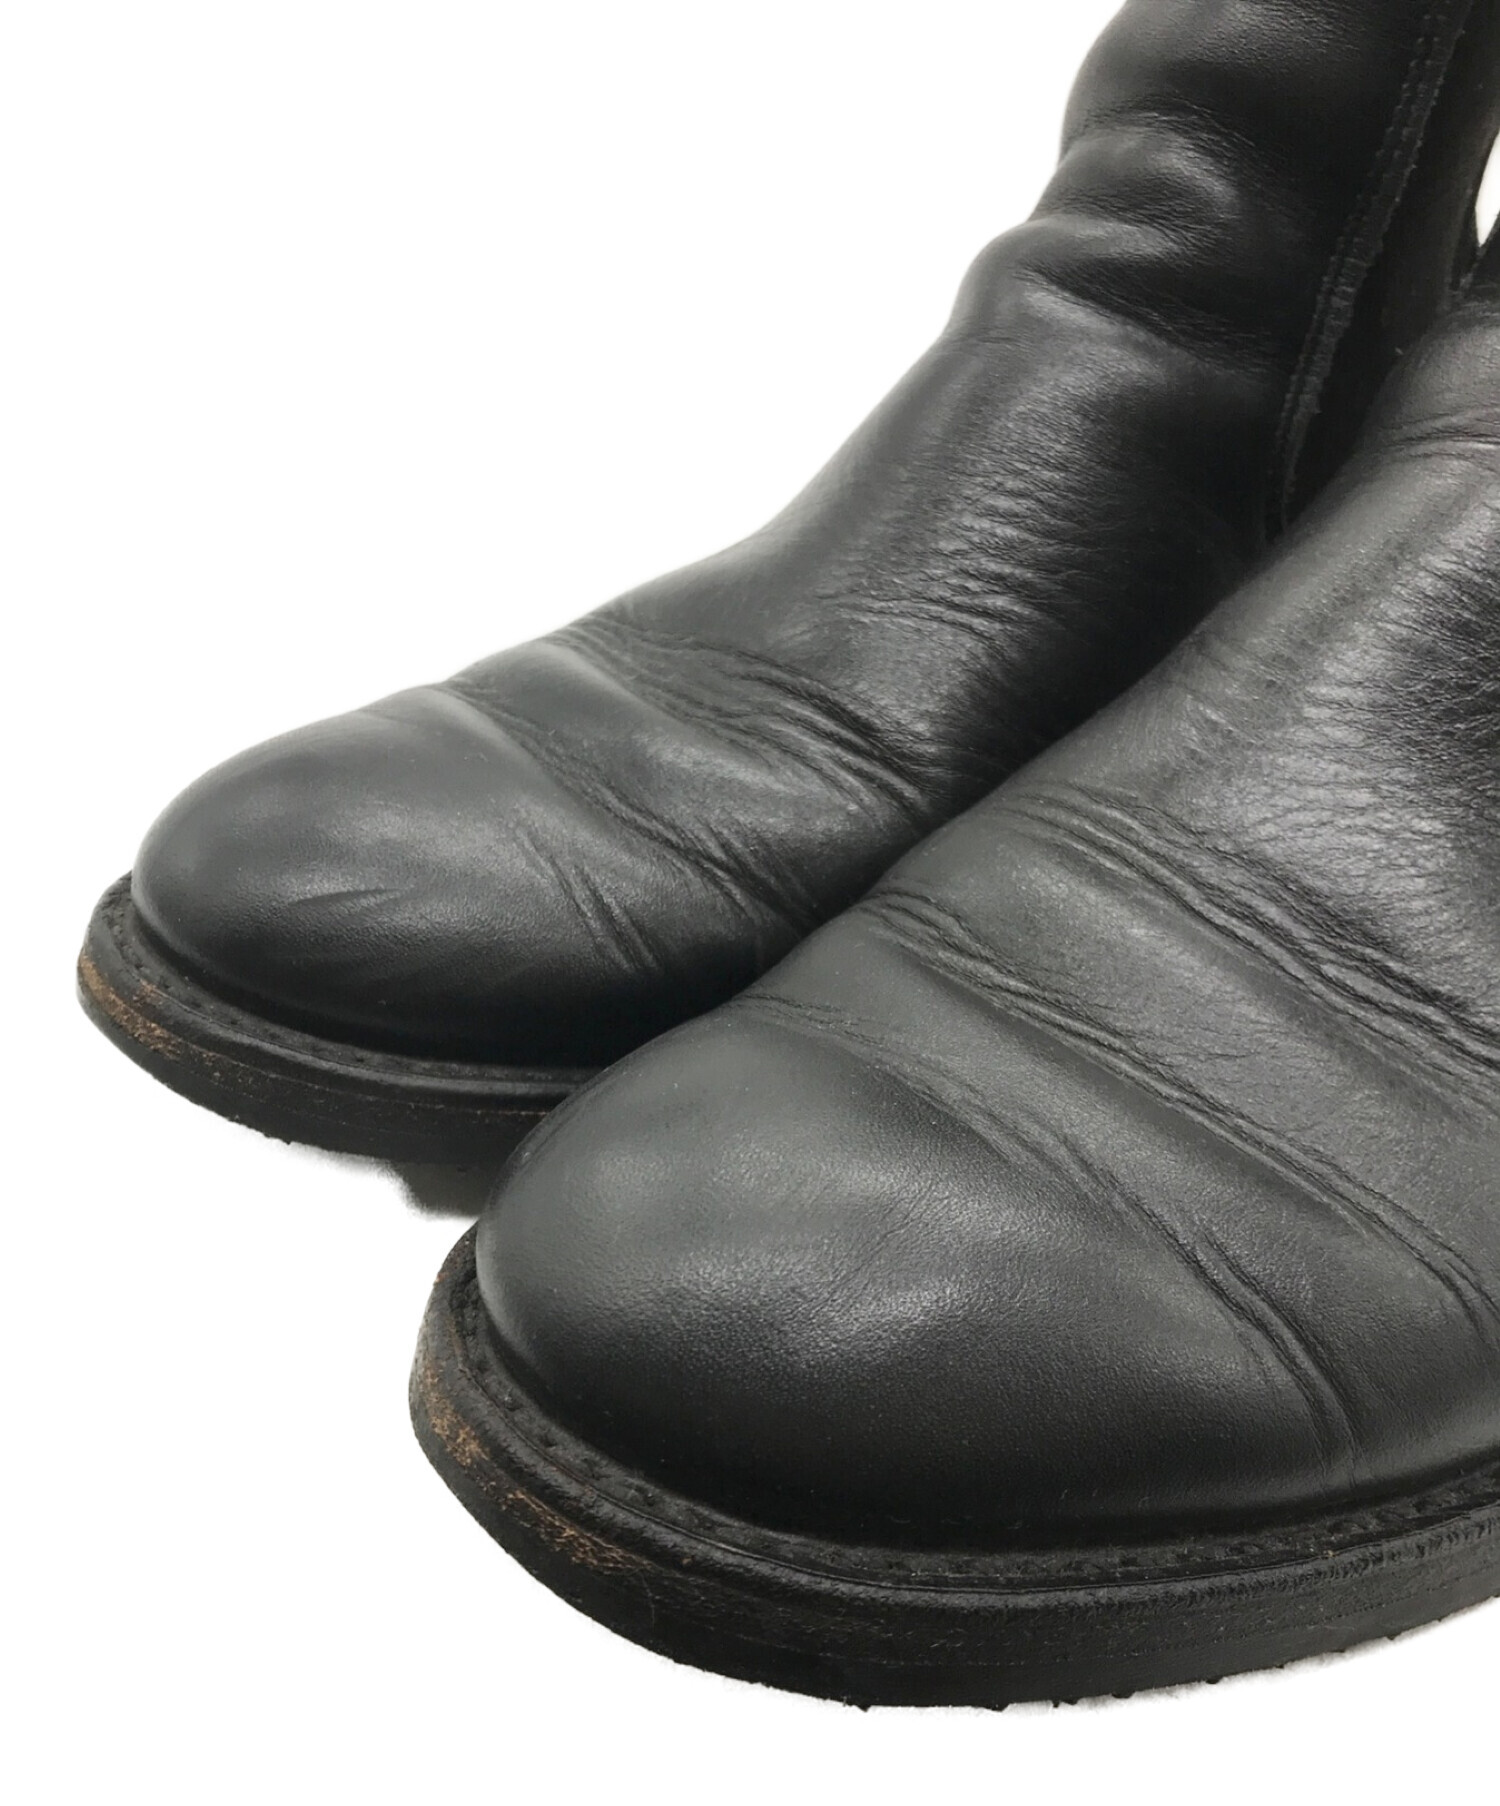 RED WING Mil-1 CONGRESS BOOTS 9079 8D - ブーツ